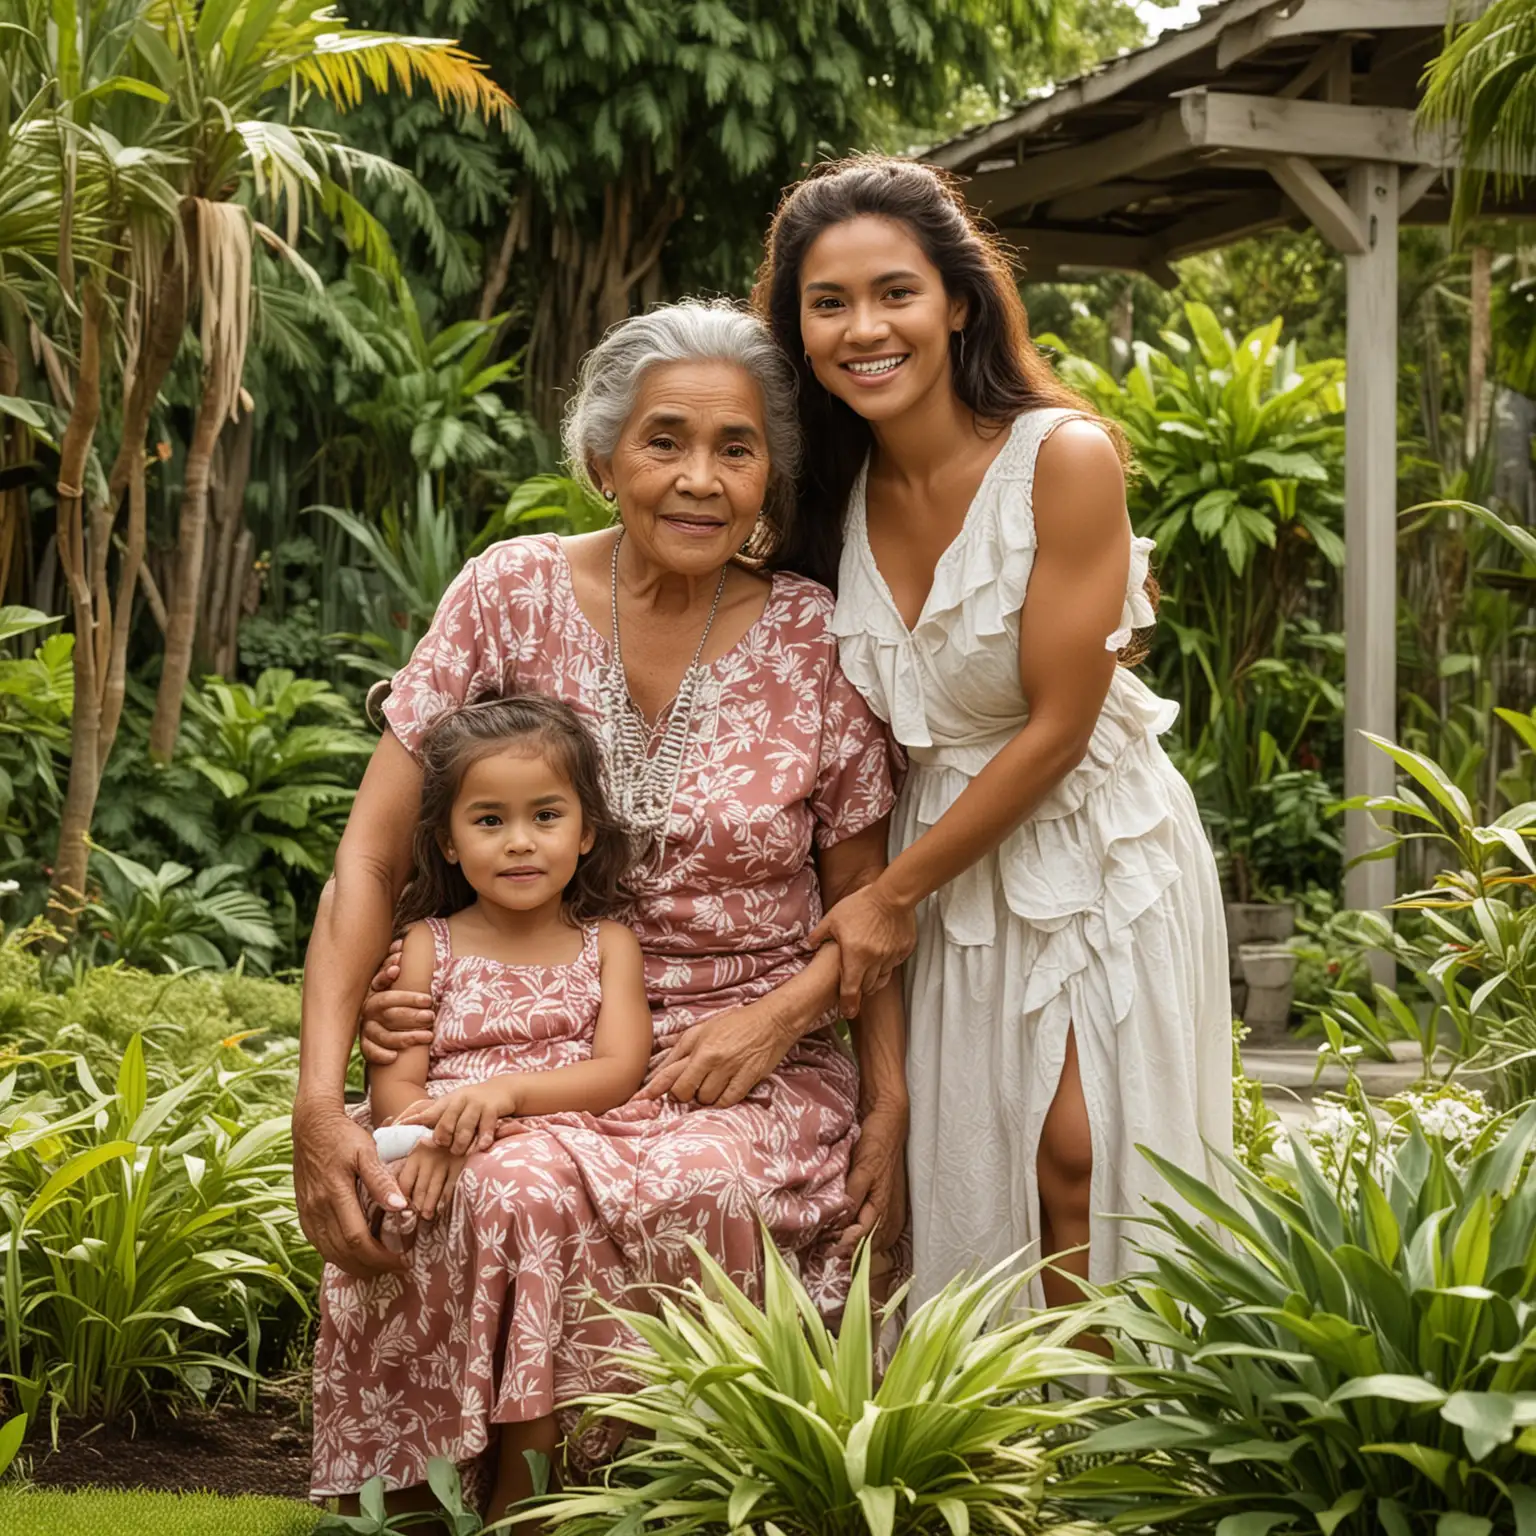 Polynesian grandmother, mother, grandaughter
with grandchild in a garden